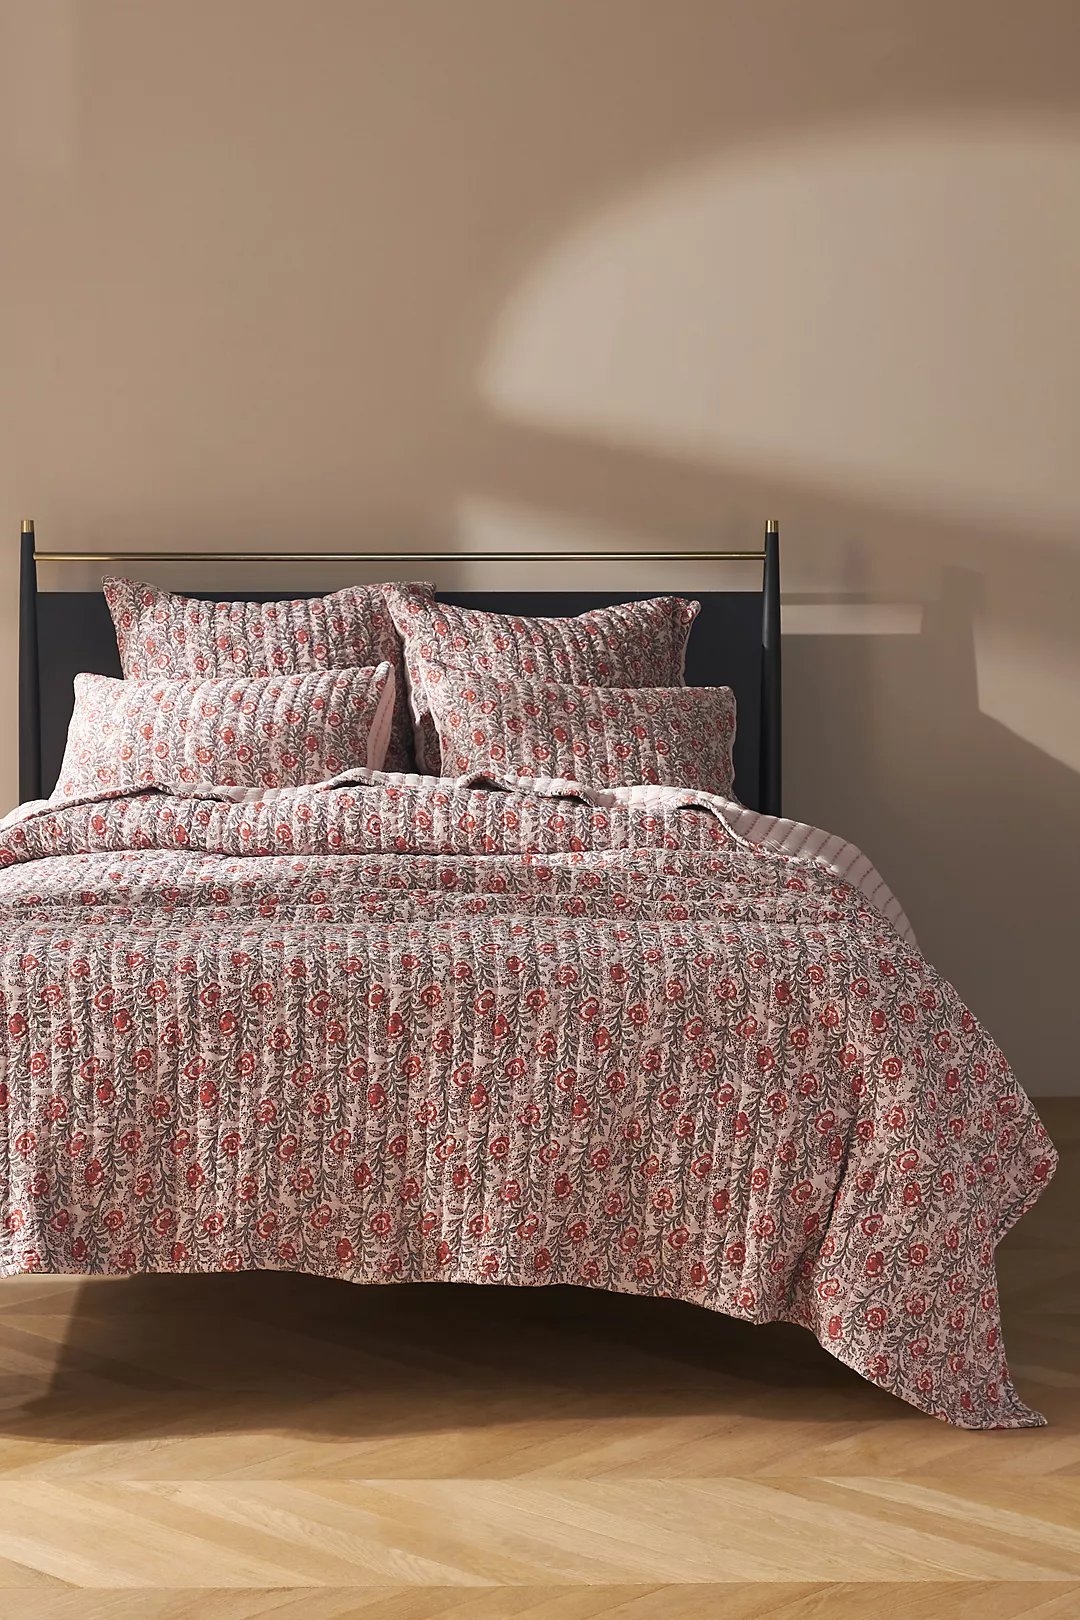 Rowena Coverlet By Amber Lewis for Anthropologie in Pink, King - Image 2